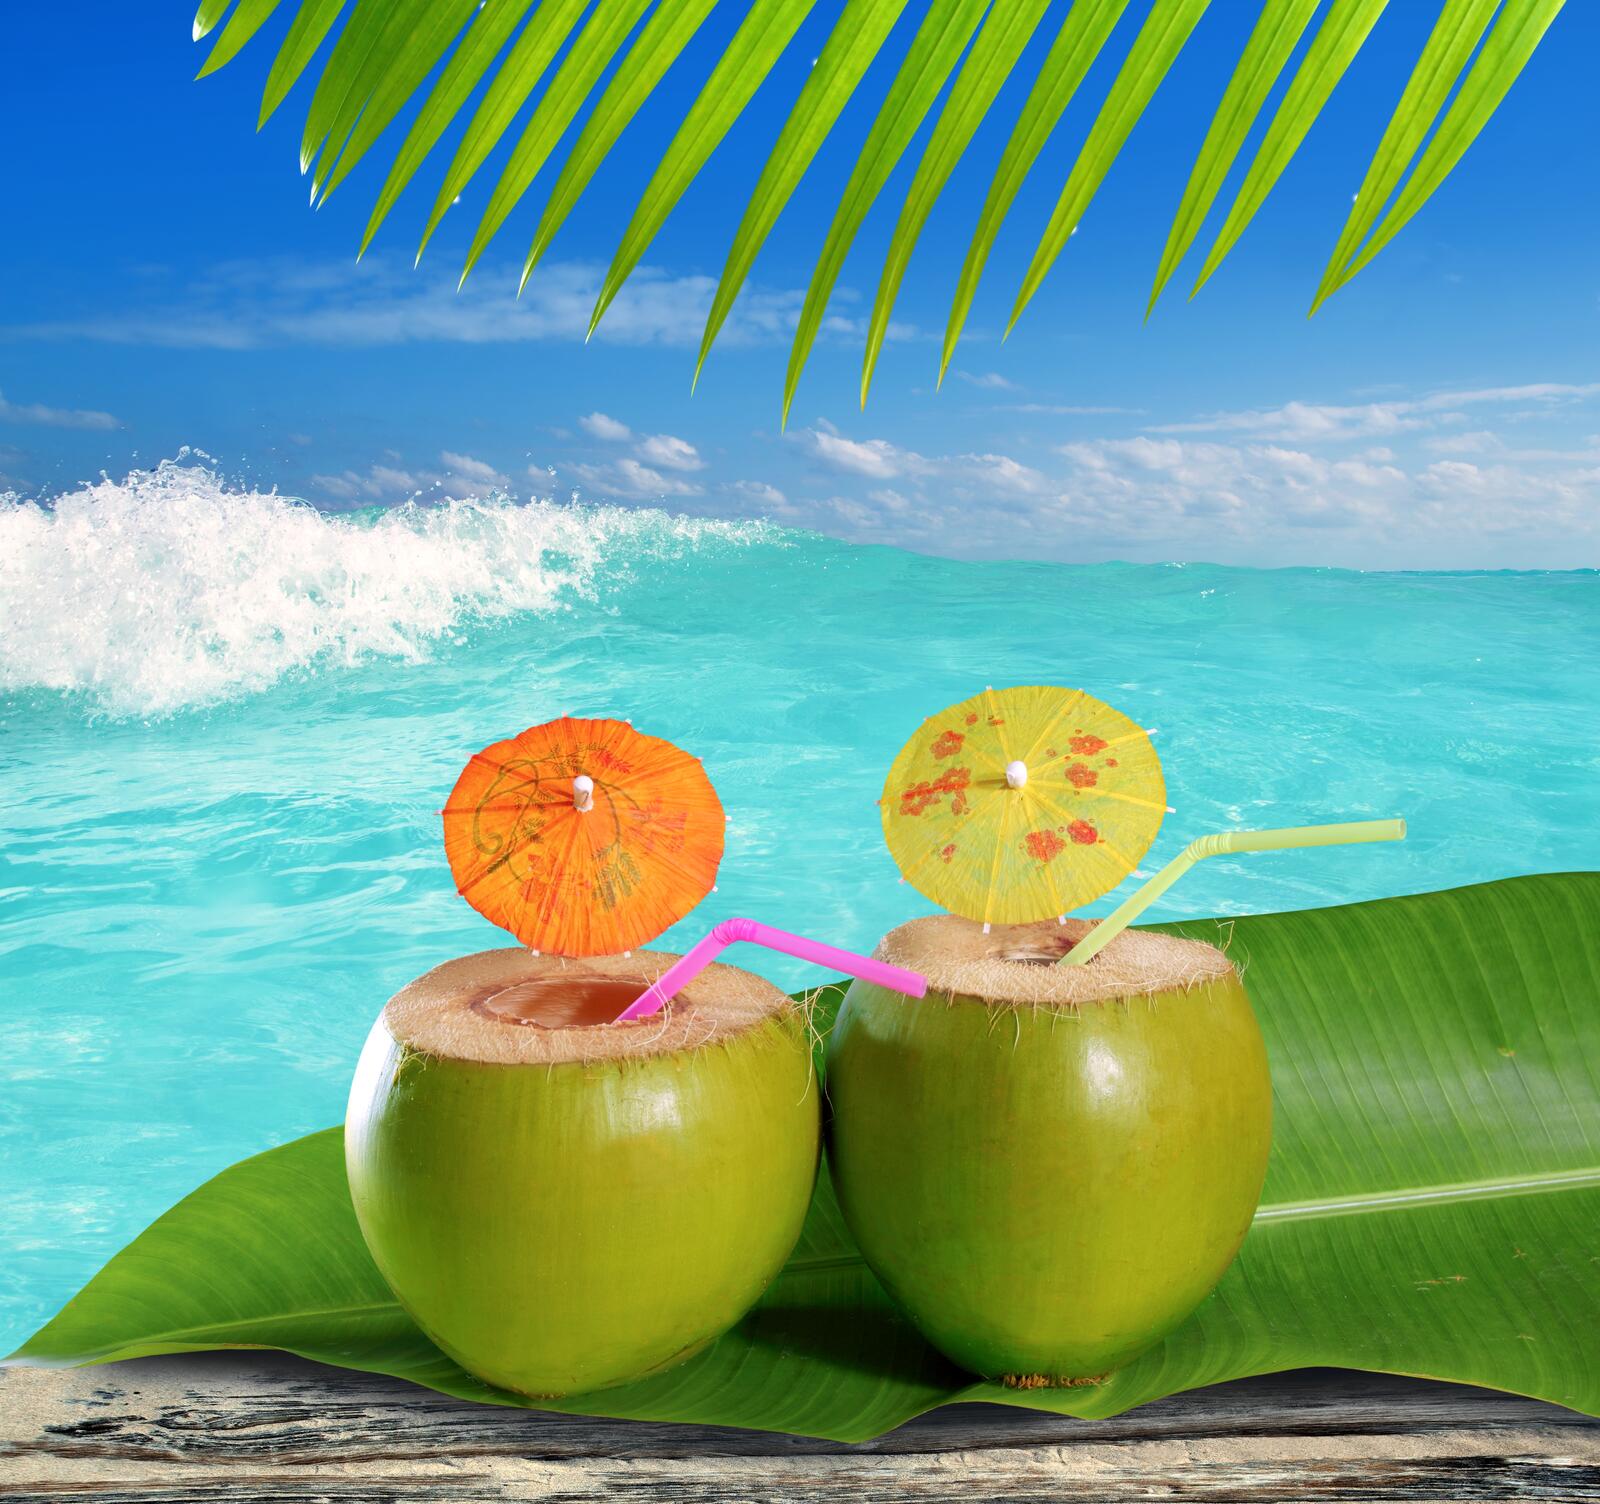 Wallpapers sea coconuts cocktails on the desktop